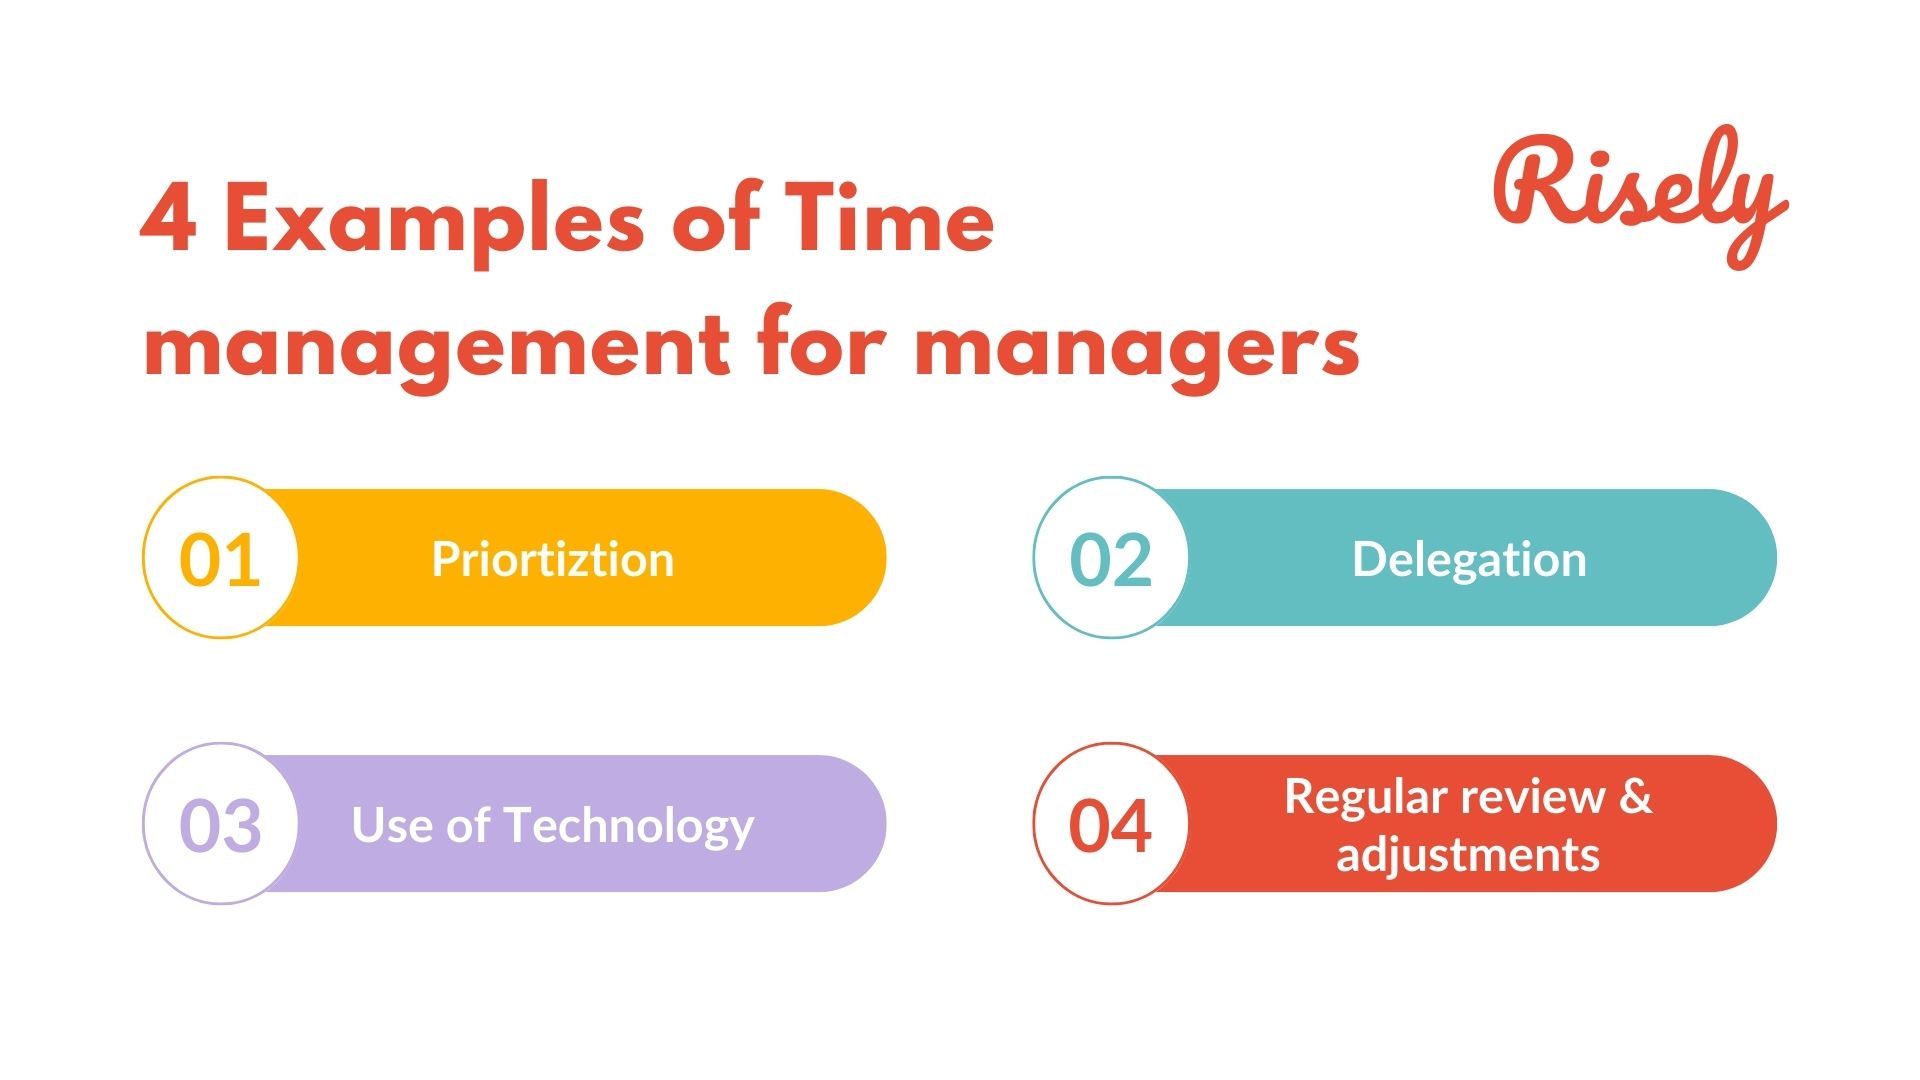 Time management examples for managers